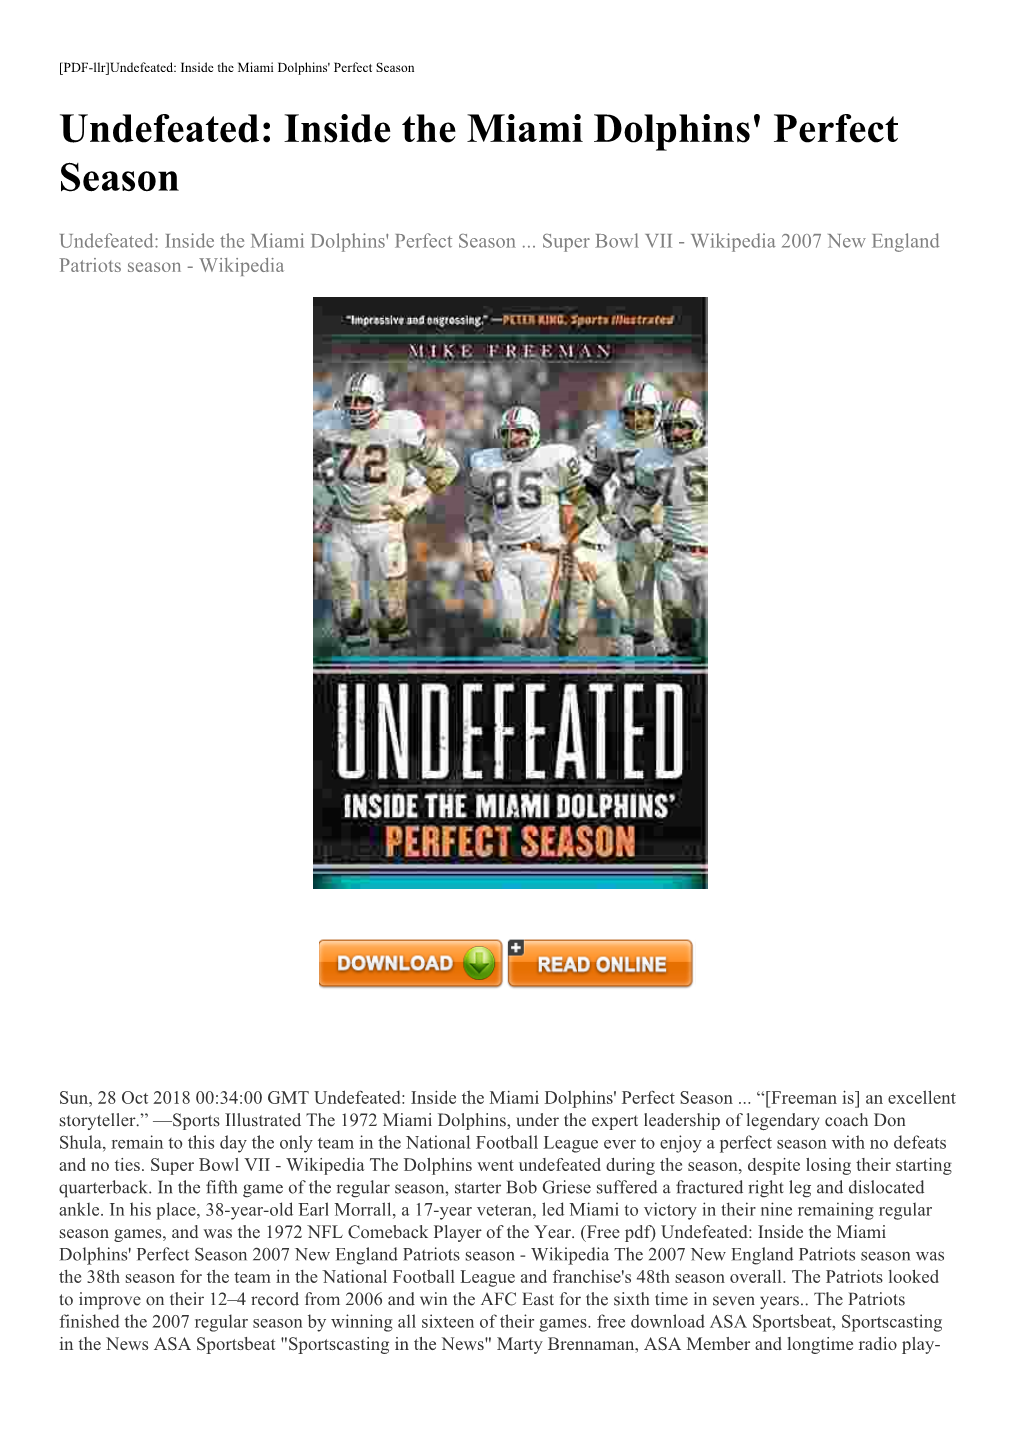 (Free Pdf) Undefeated: Inside the Miami Dolphins' Perfect Season